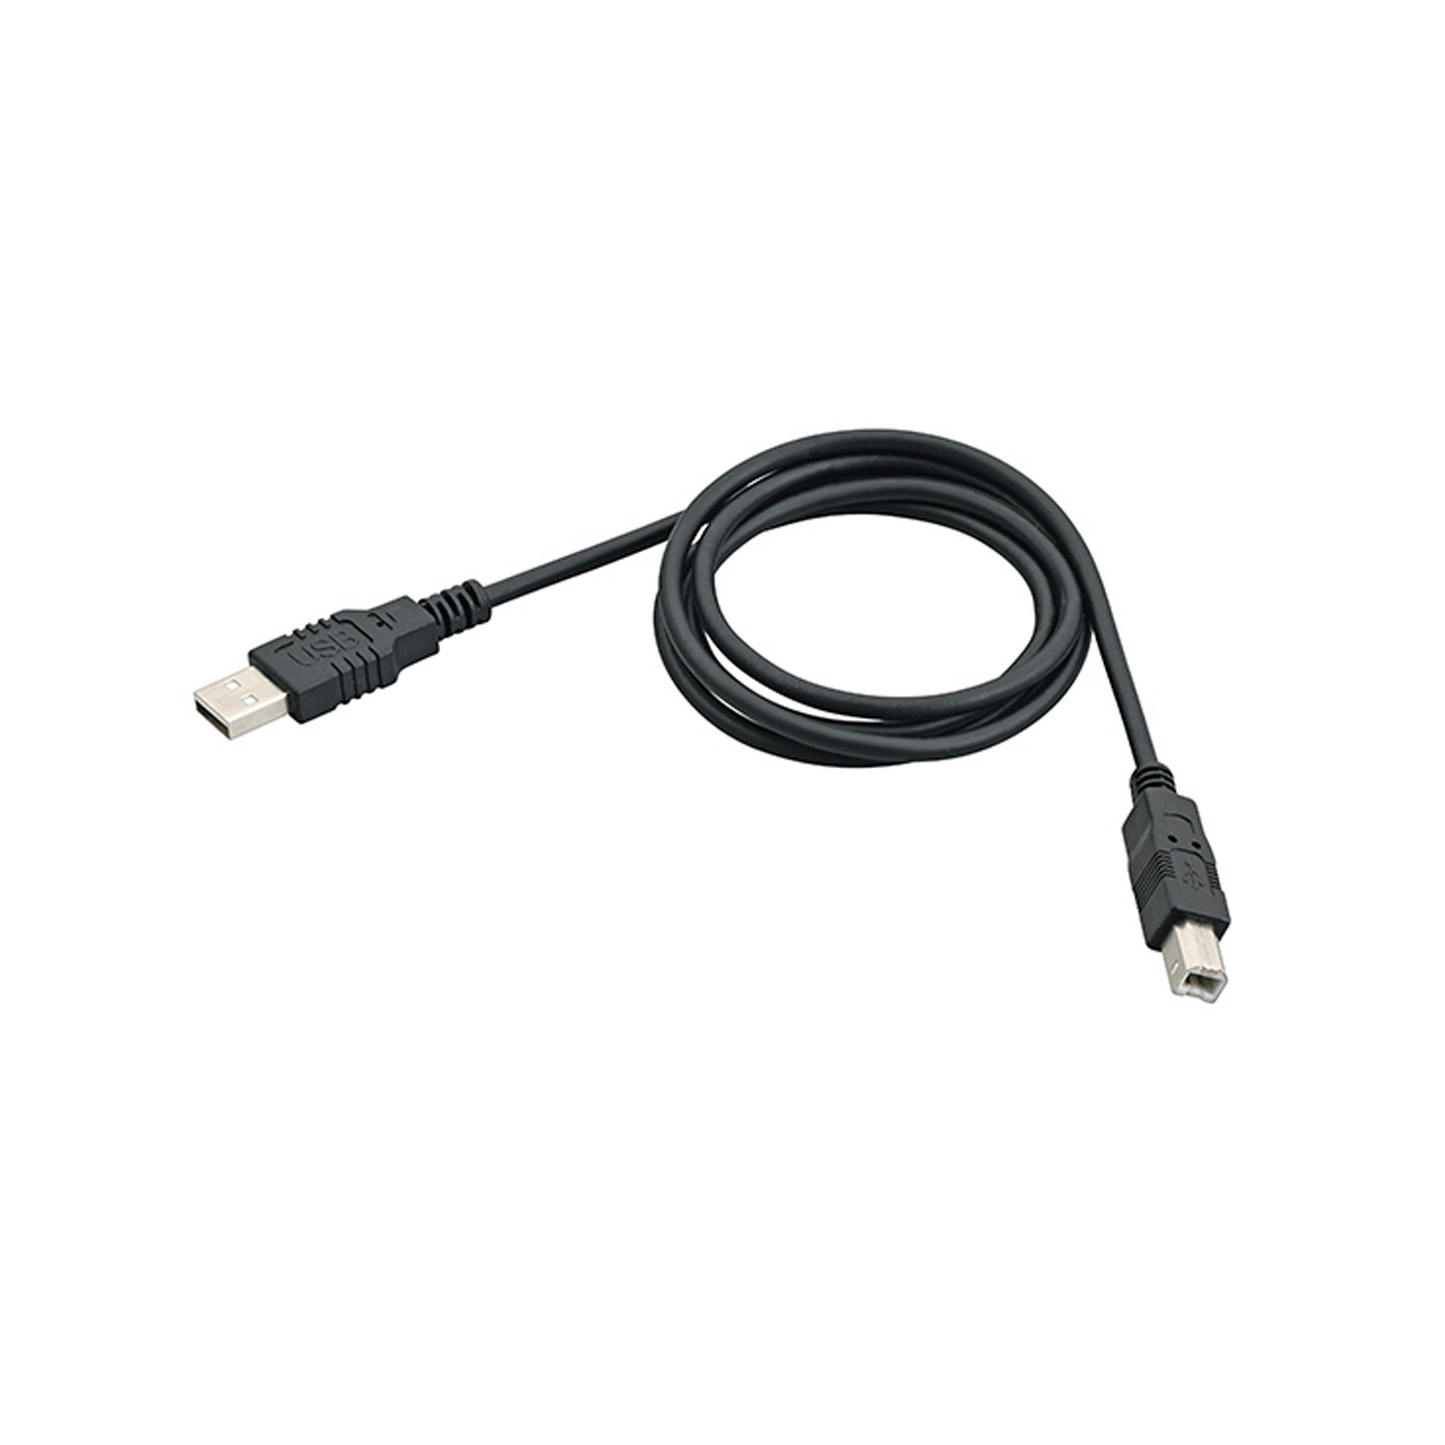 B5262 USB Cable